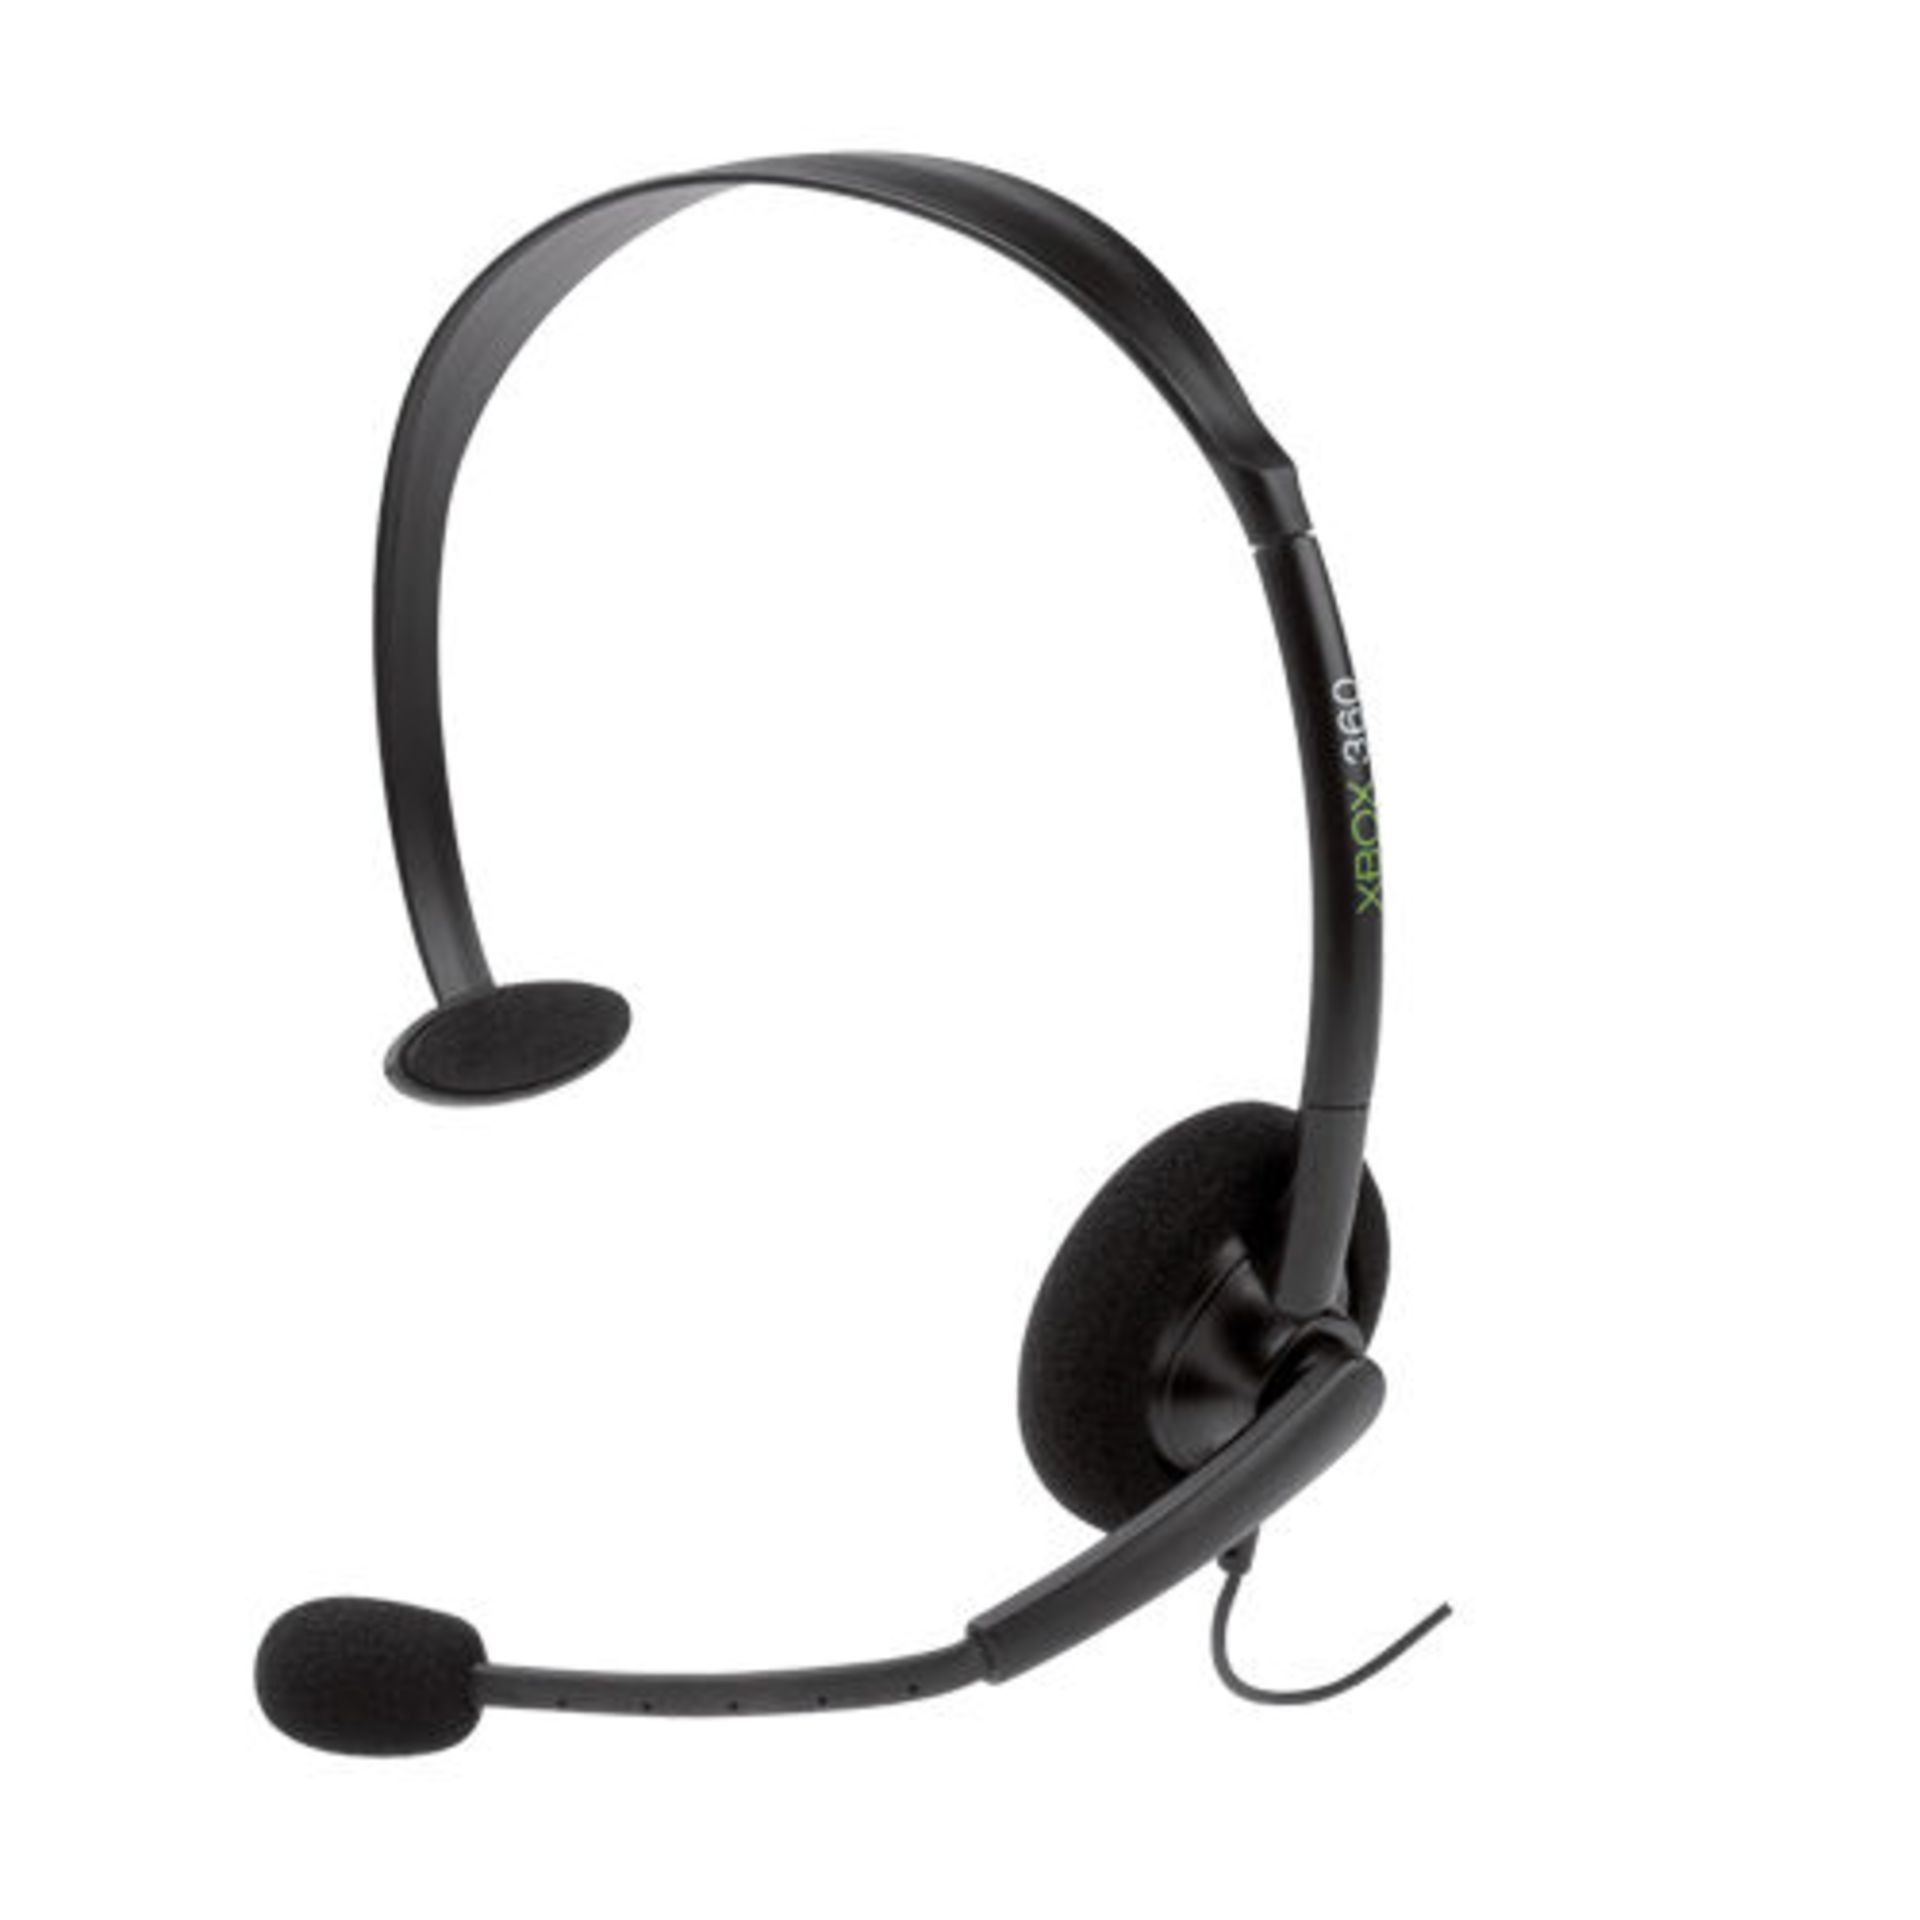 500 X OFFICIAL XBOX 360 NEW LIVE ONLINE CHAT HEADSET WITH MIC GAMING HEADPHONES 2.5MM AUX - Image 5 of 5